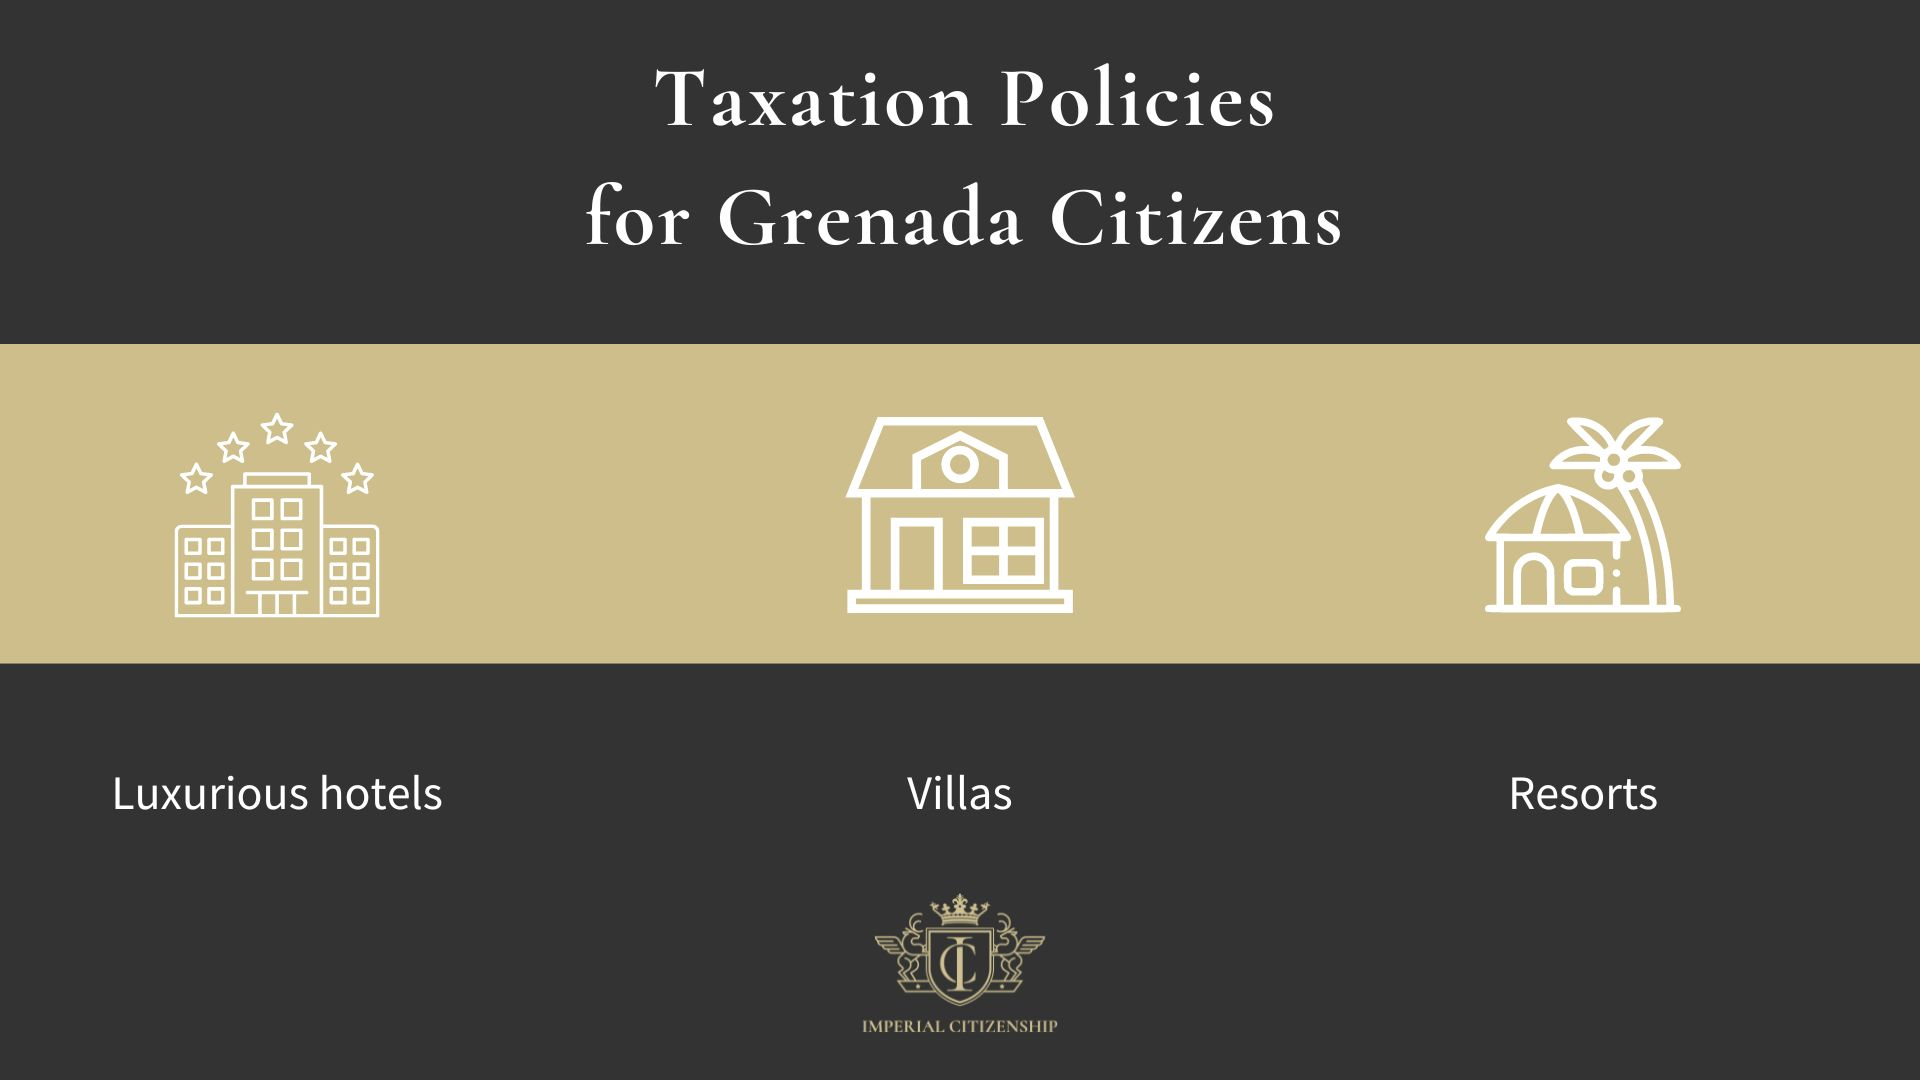 Tax Policies for Grenada Citizens